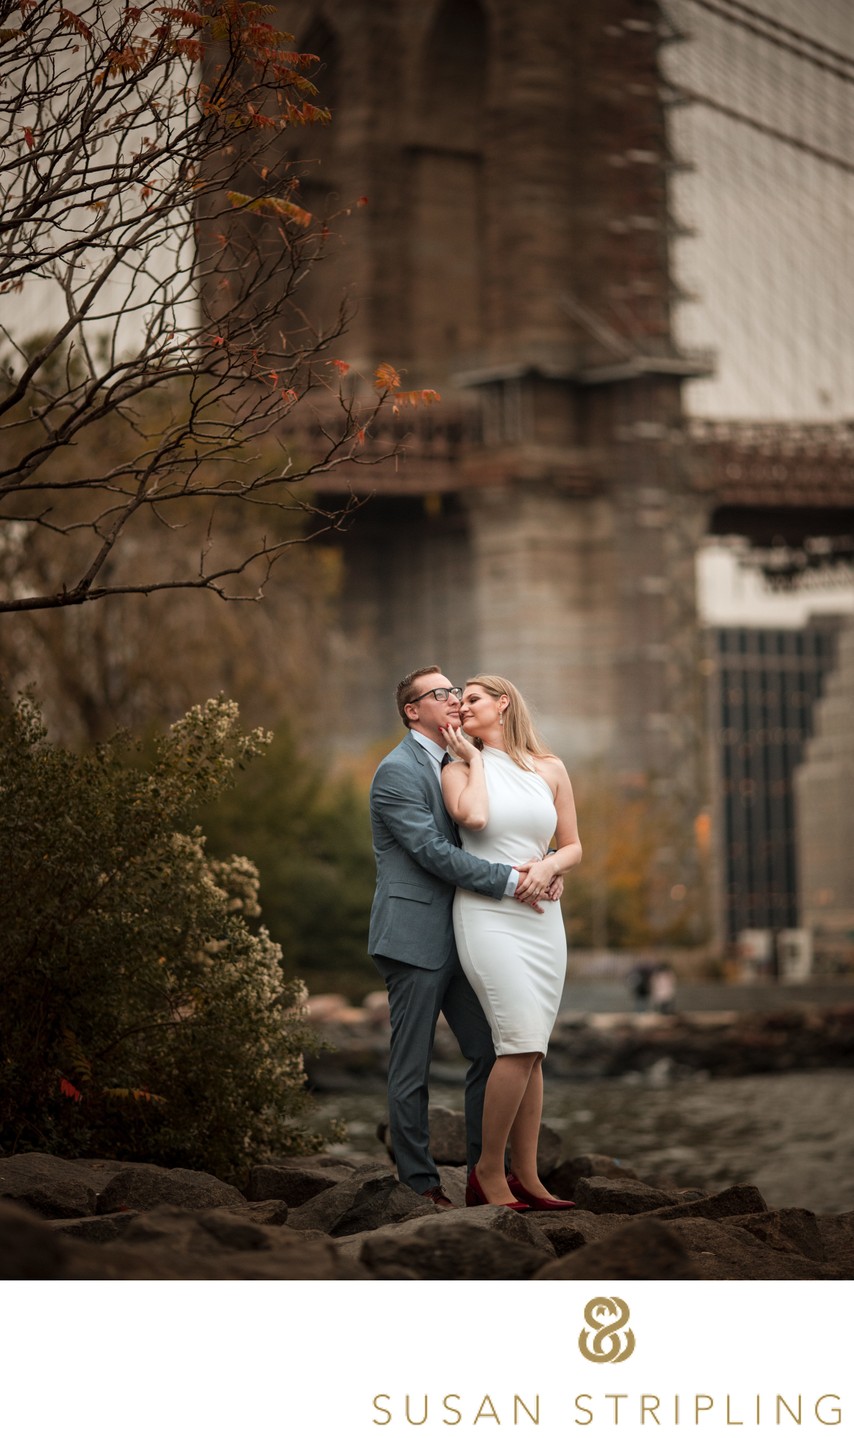 Rustic Chic Engagement Photos in Dumbo Brooklyn